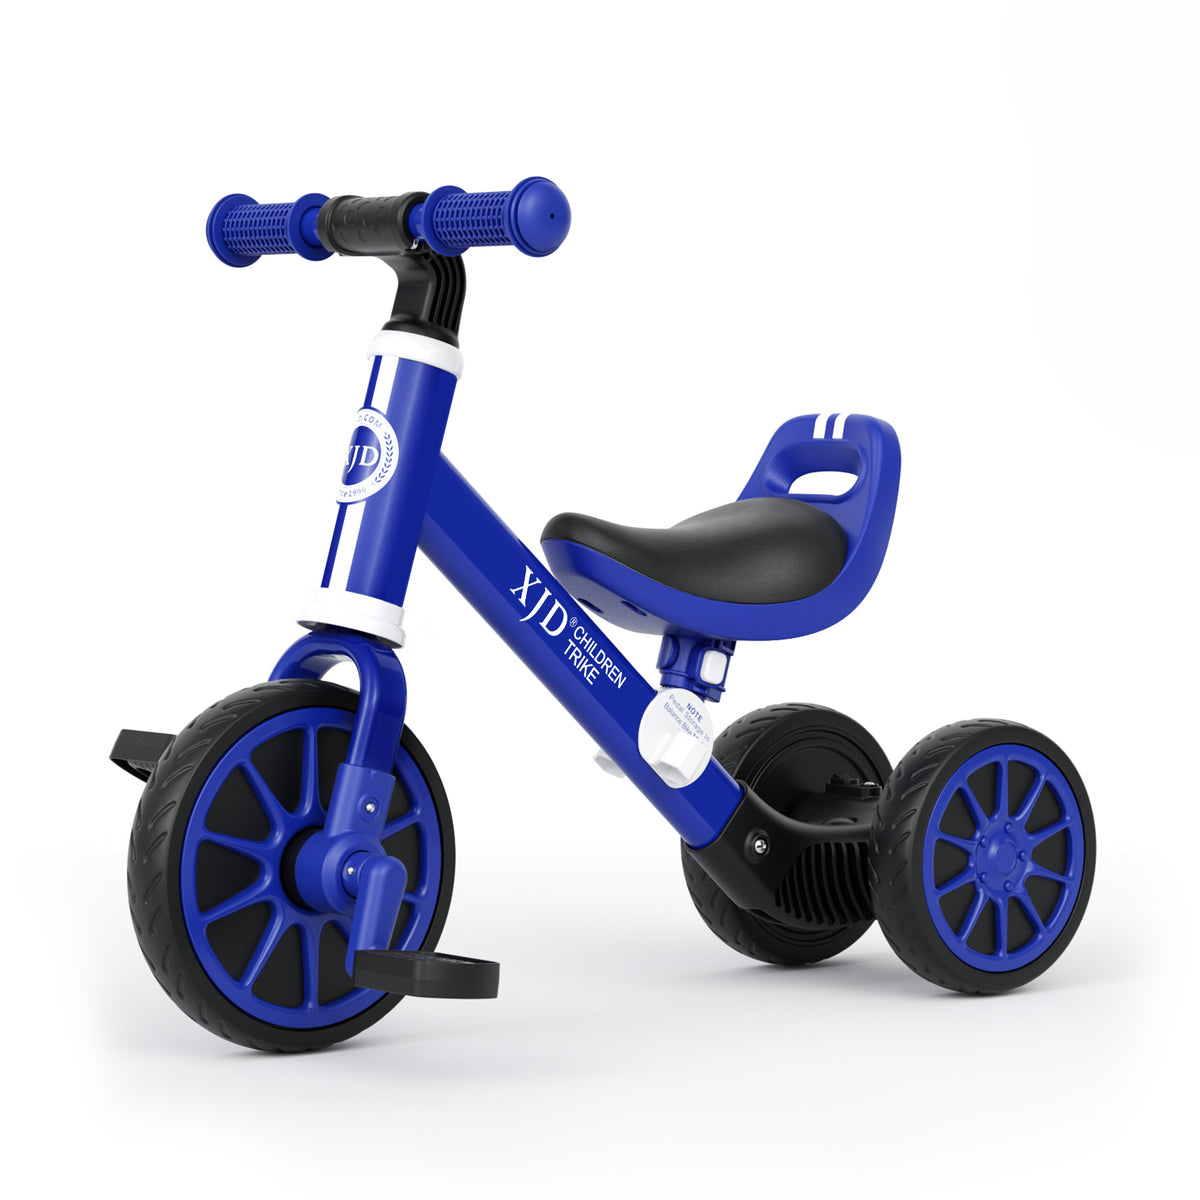 XJD Blue 3 in 1 Kids Tricycles In Stock USA